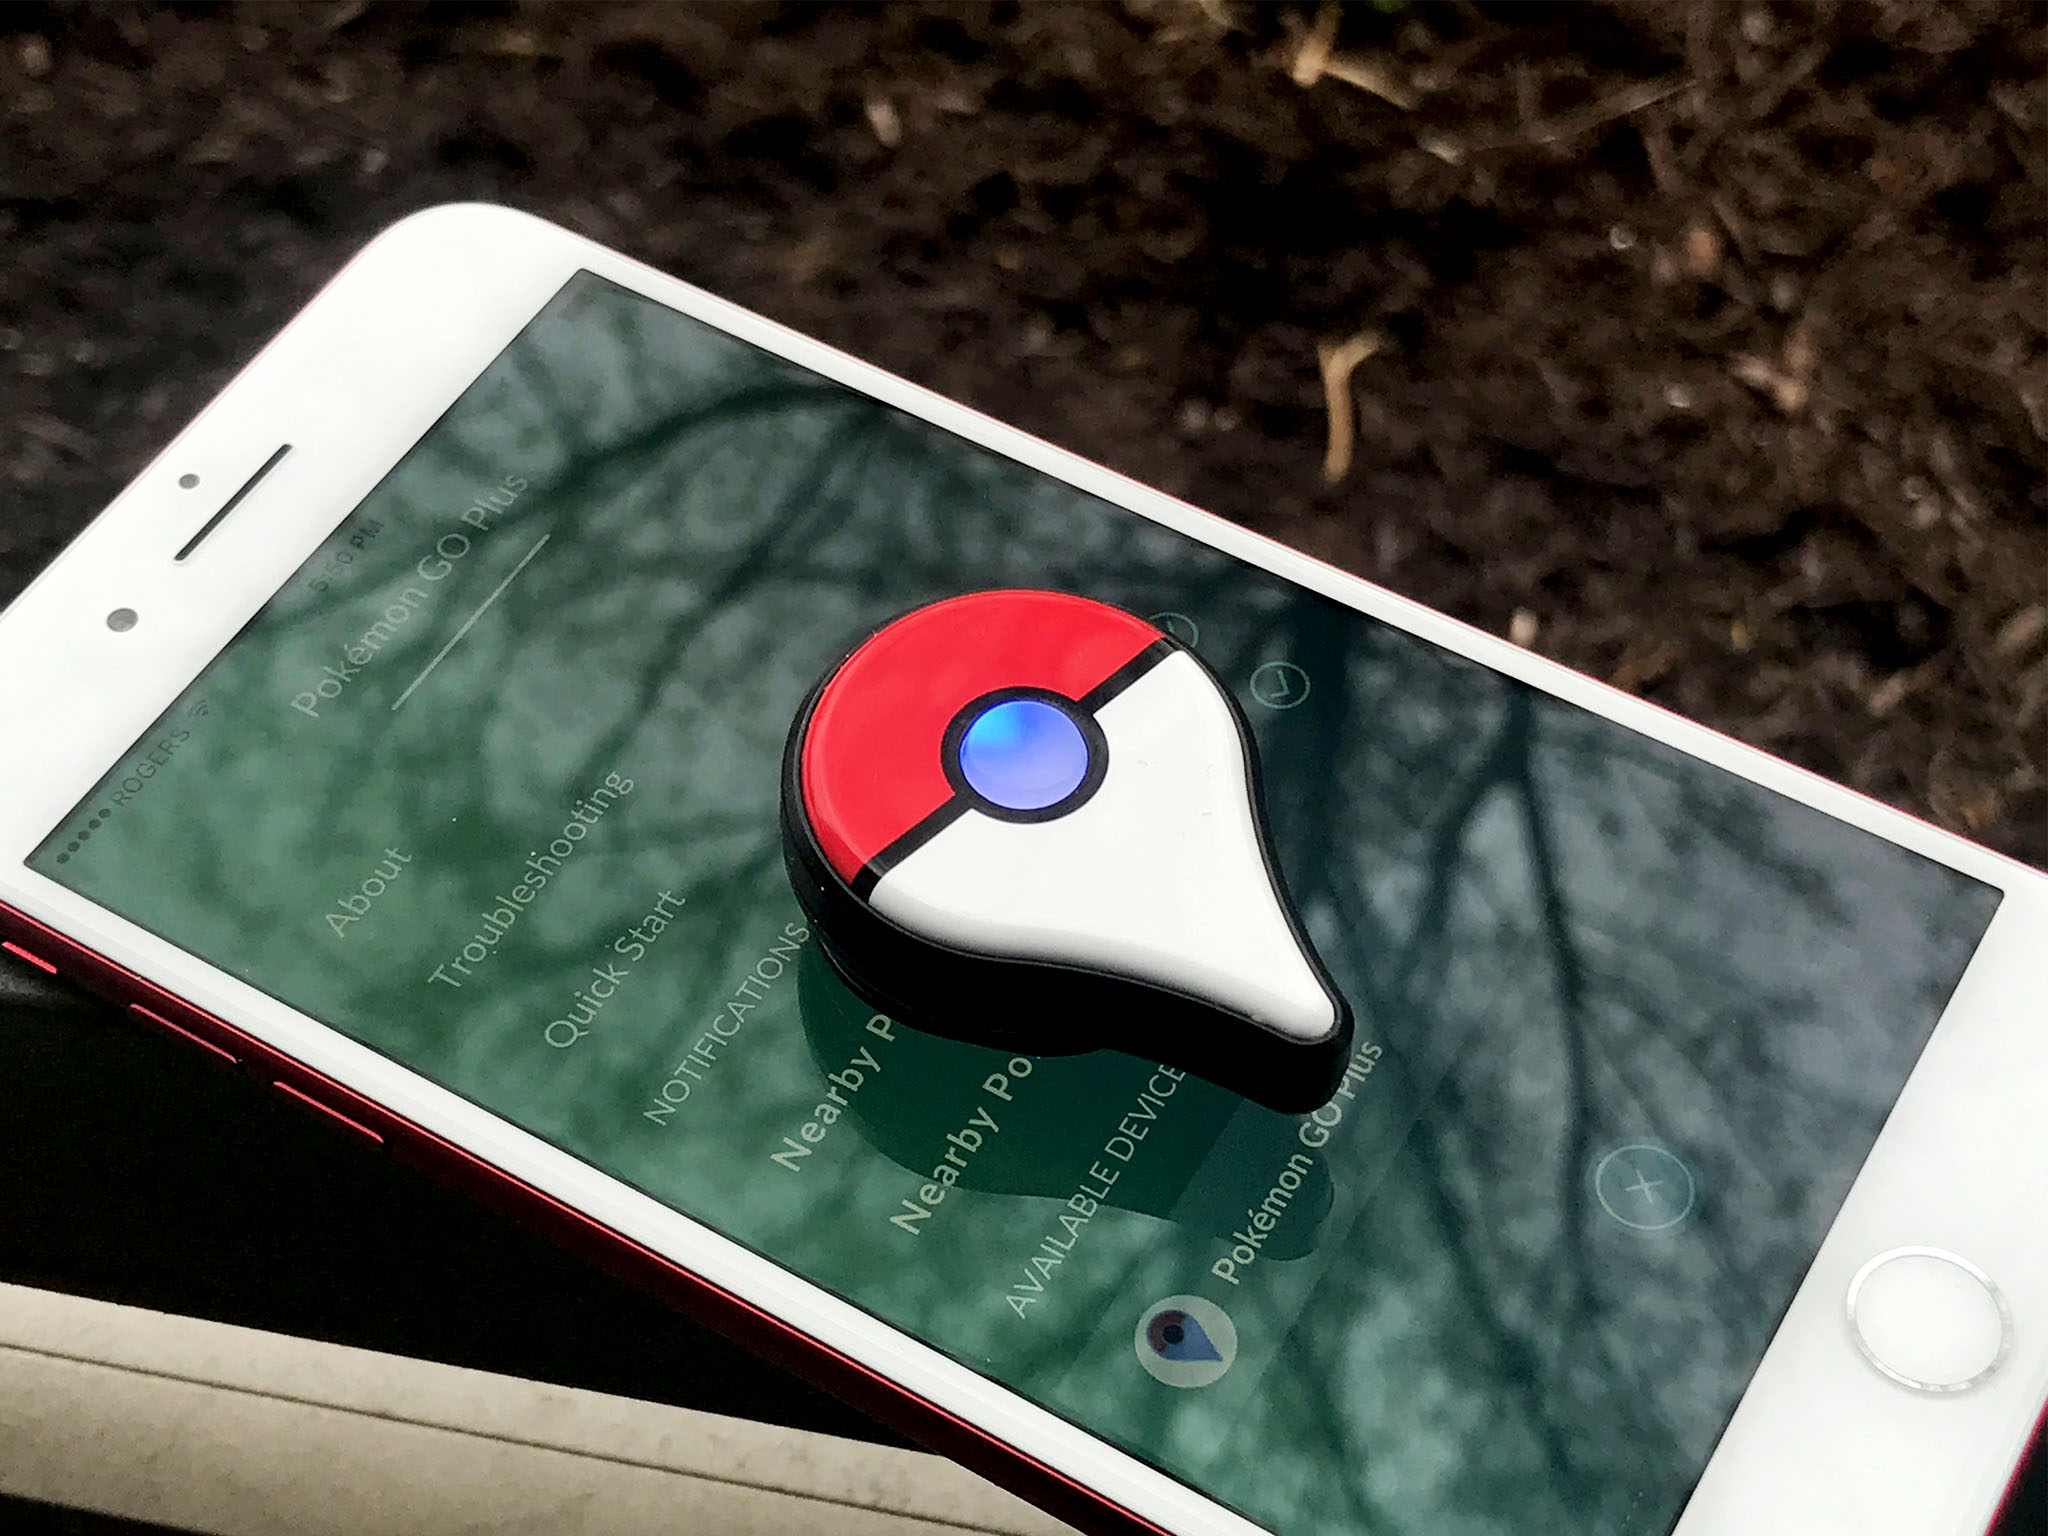 5 reasons you should buy a Pokémon Go Plus — and a couple reasons